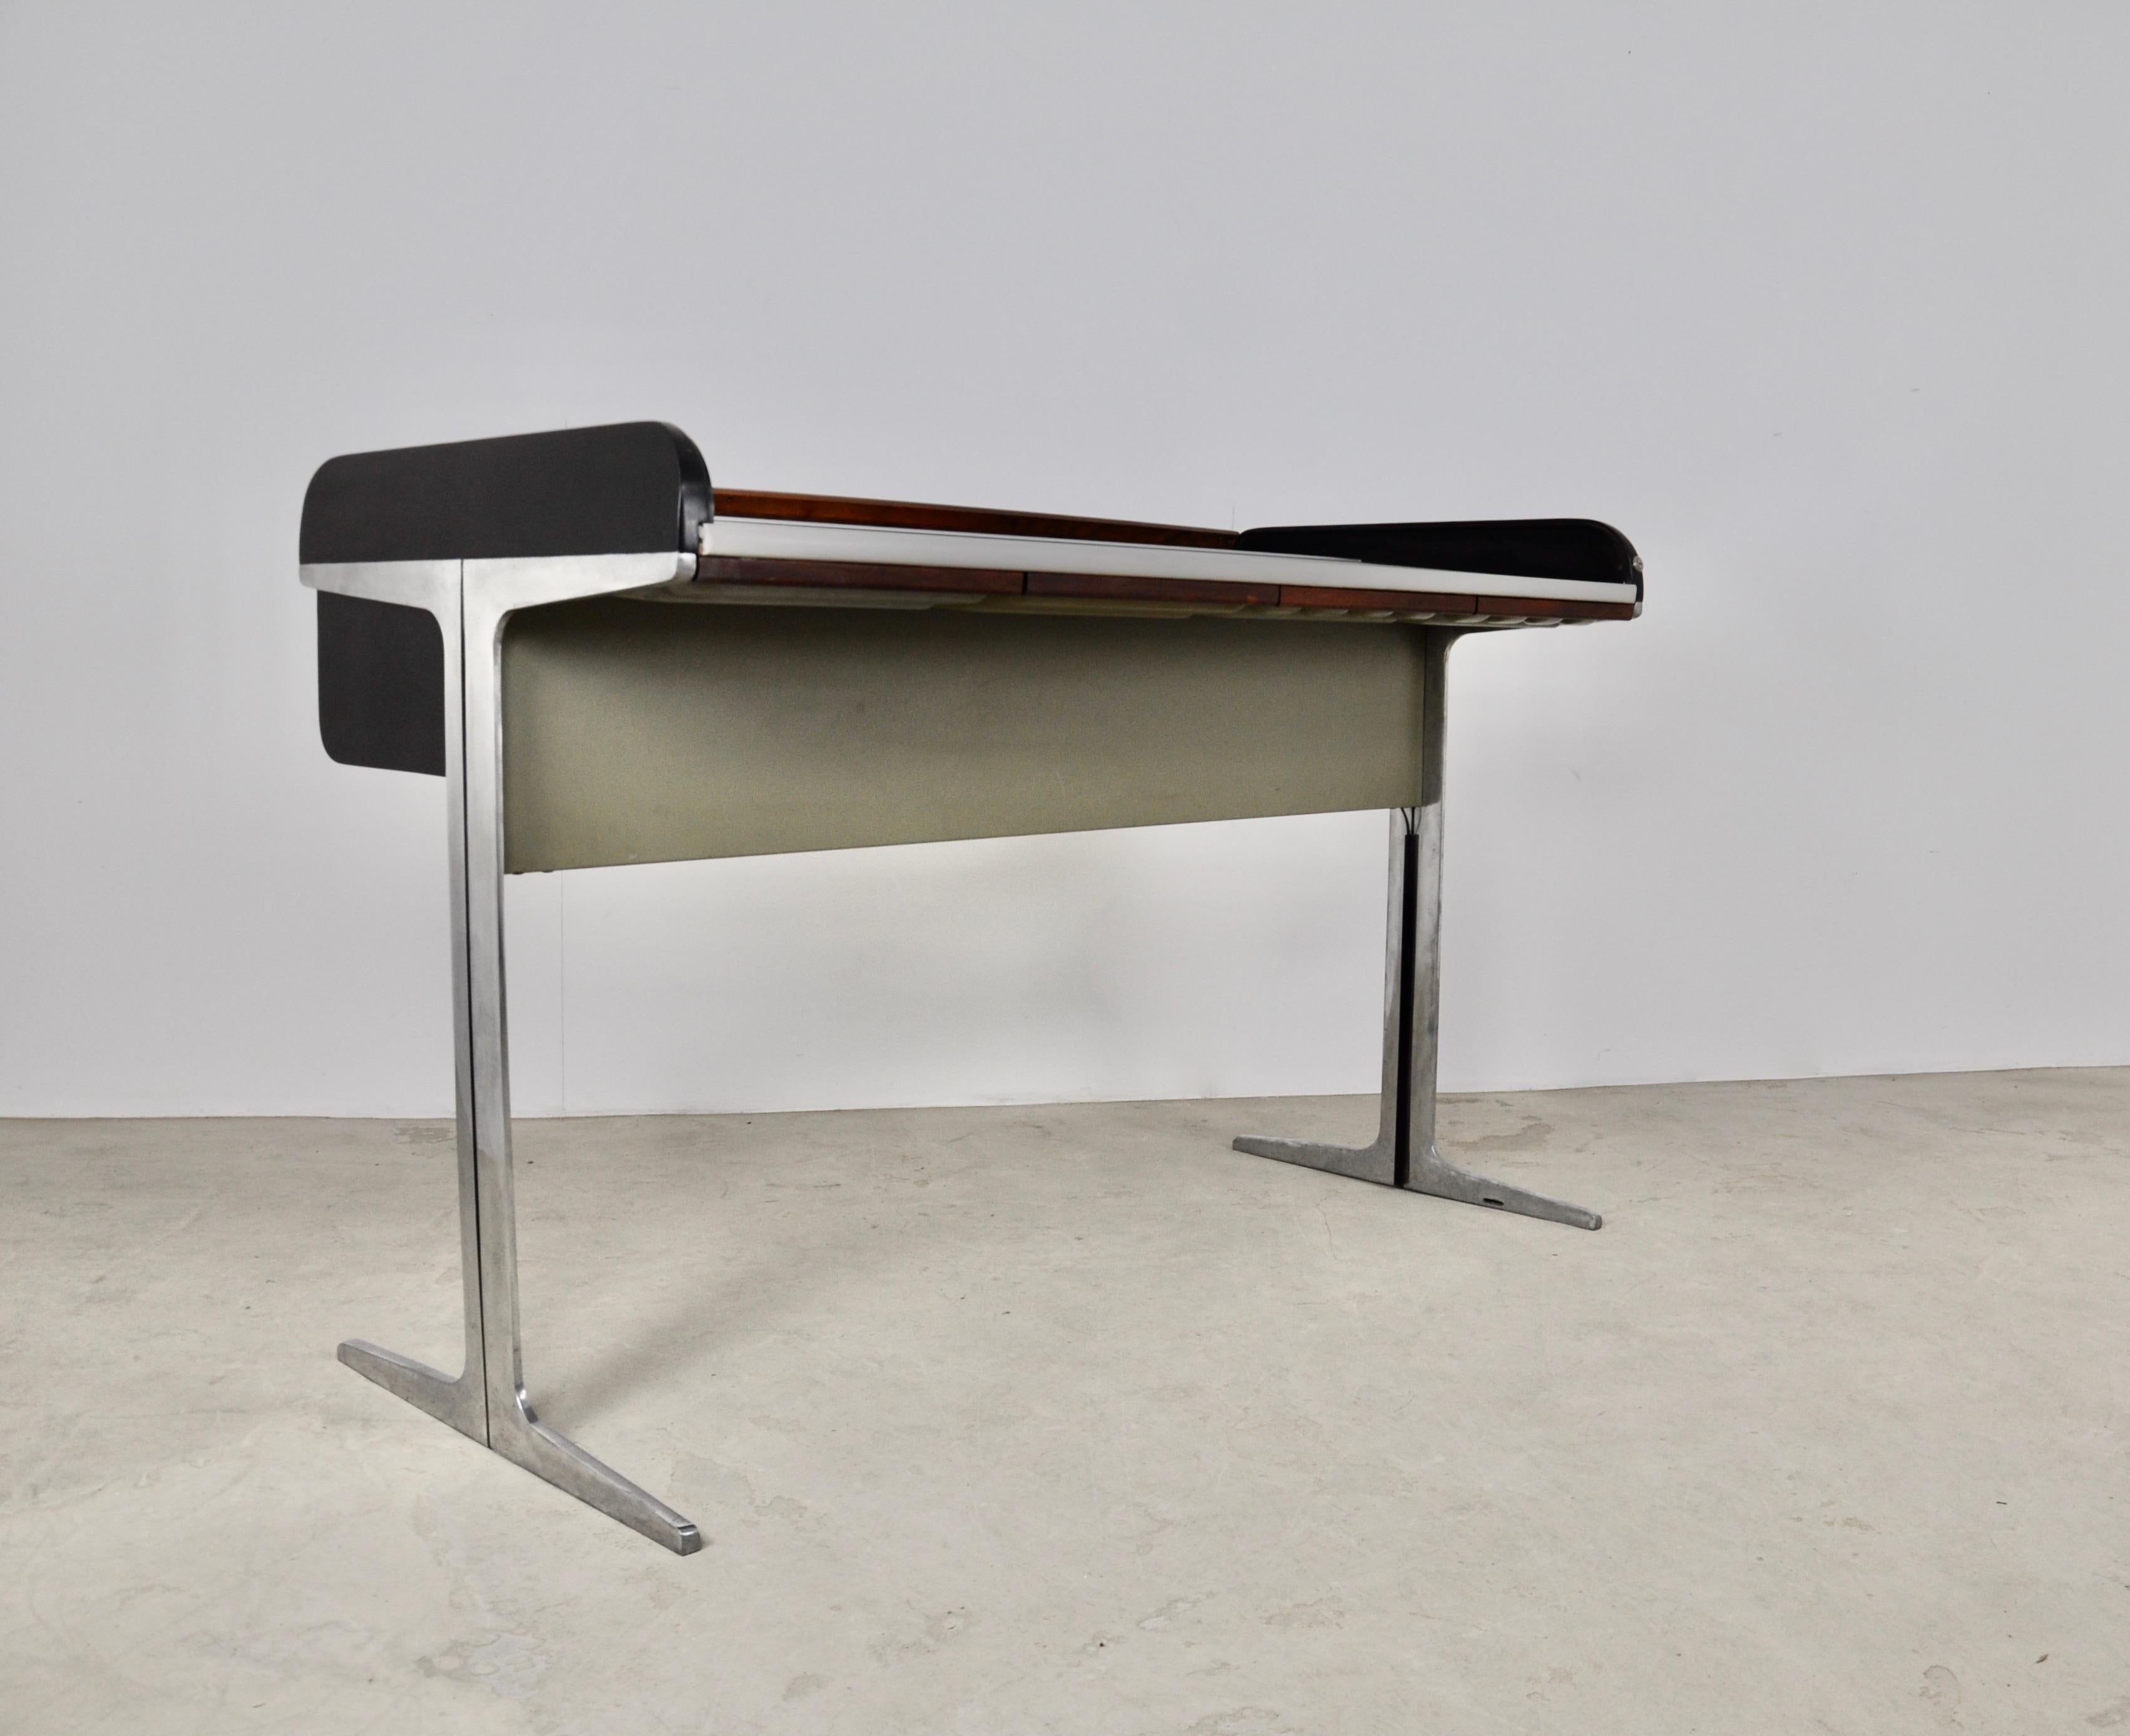 Metal and wood desk, composed of a wooden flap that slides. Wear due to time and age of the desk. Missing crossbar that connects the 2 legs.
 